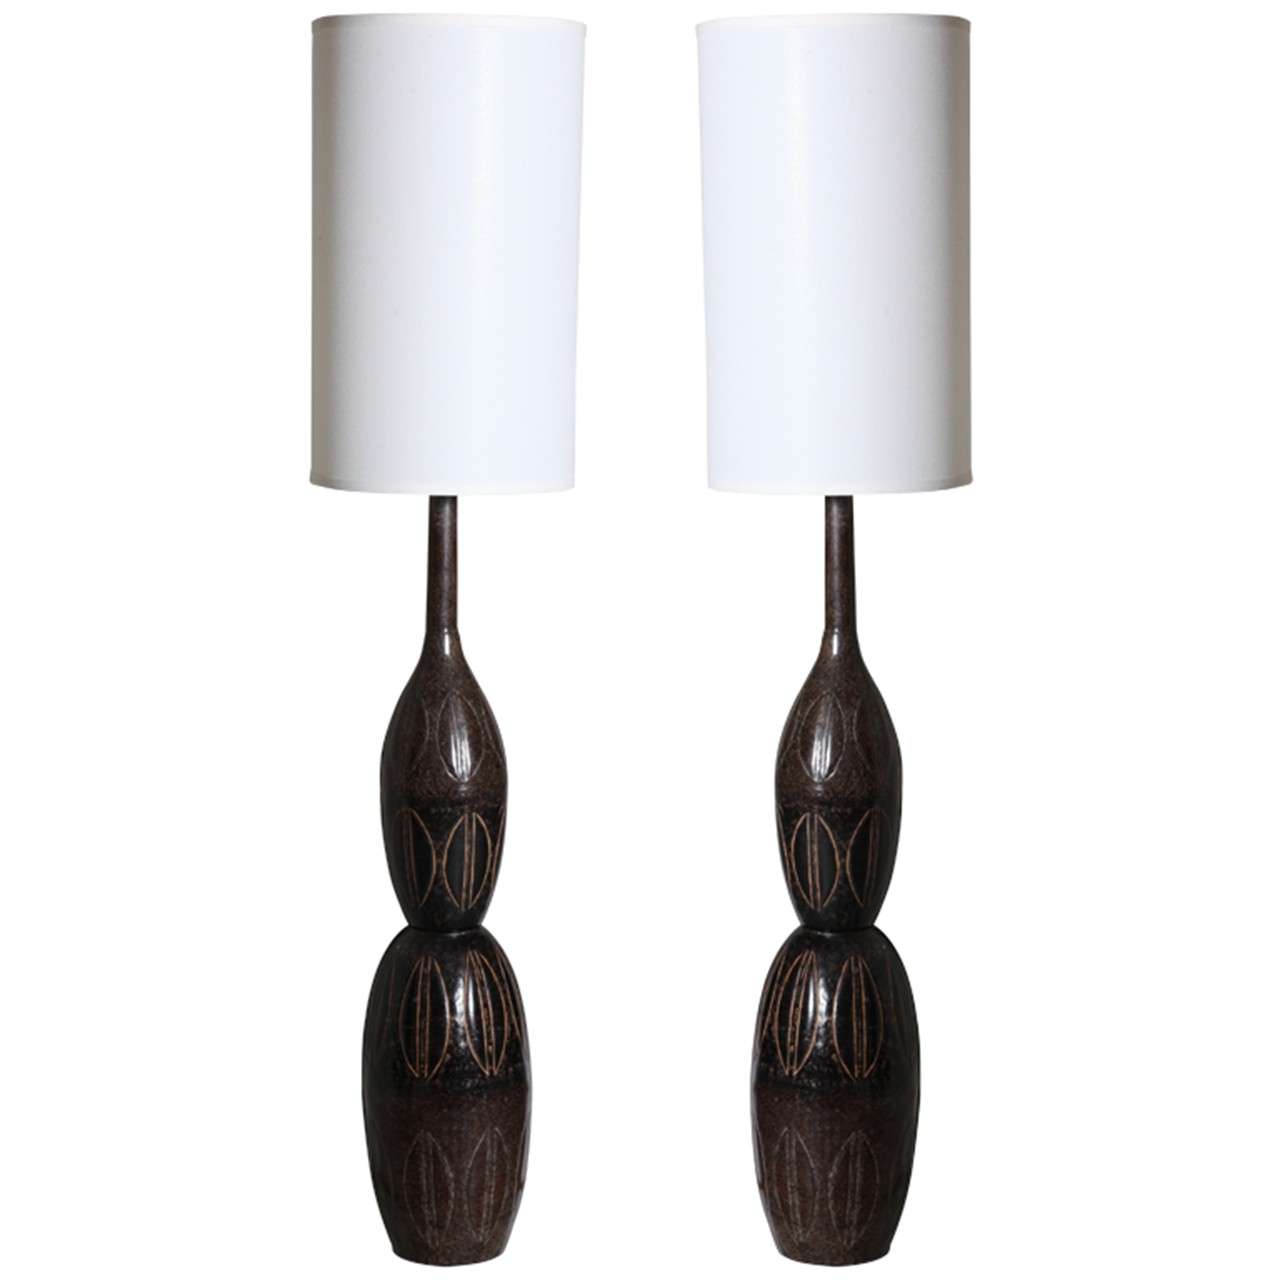 Pair of Moroccan Bronze Finish Table Lamps